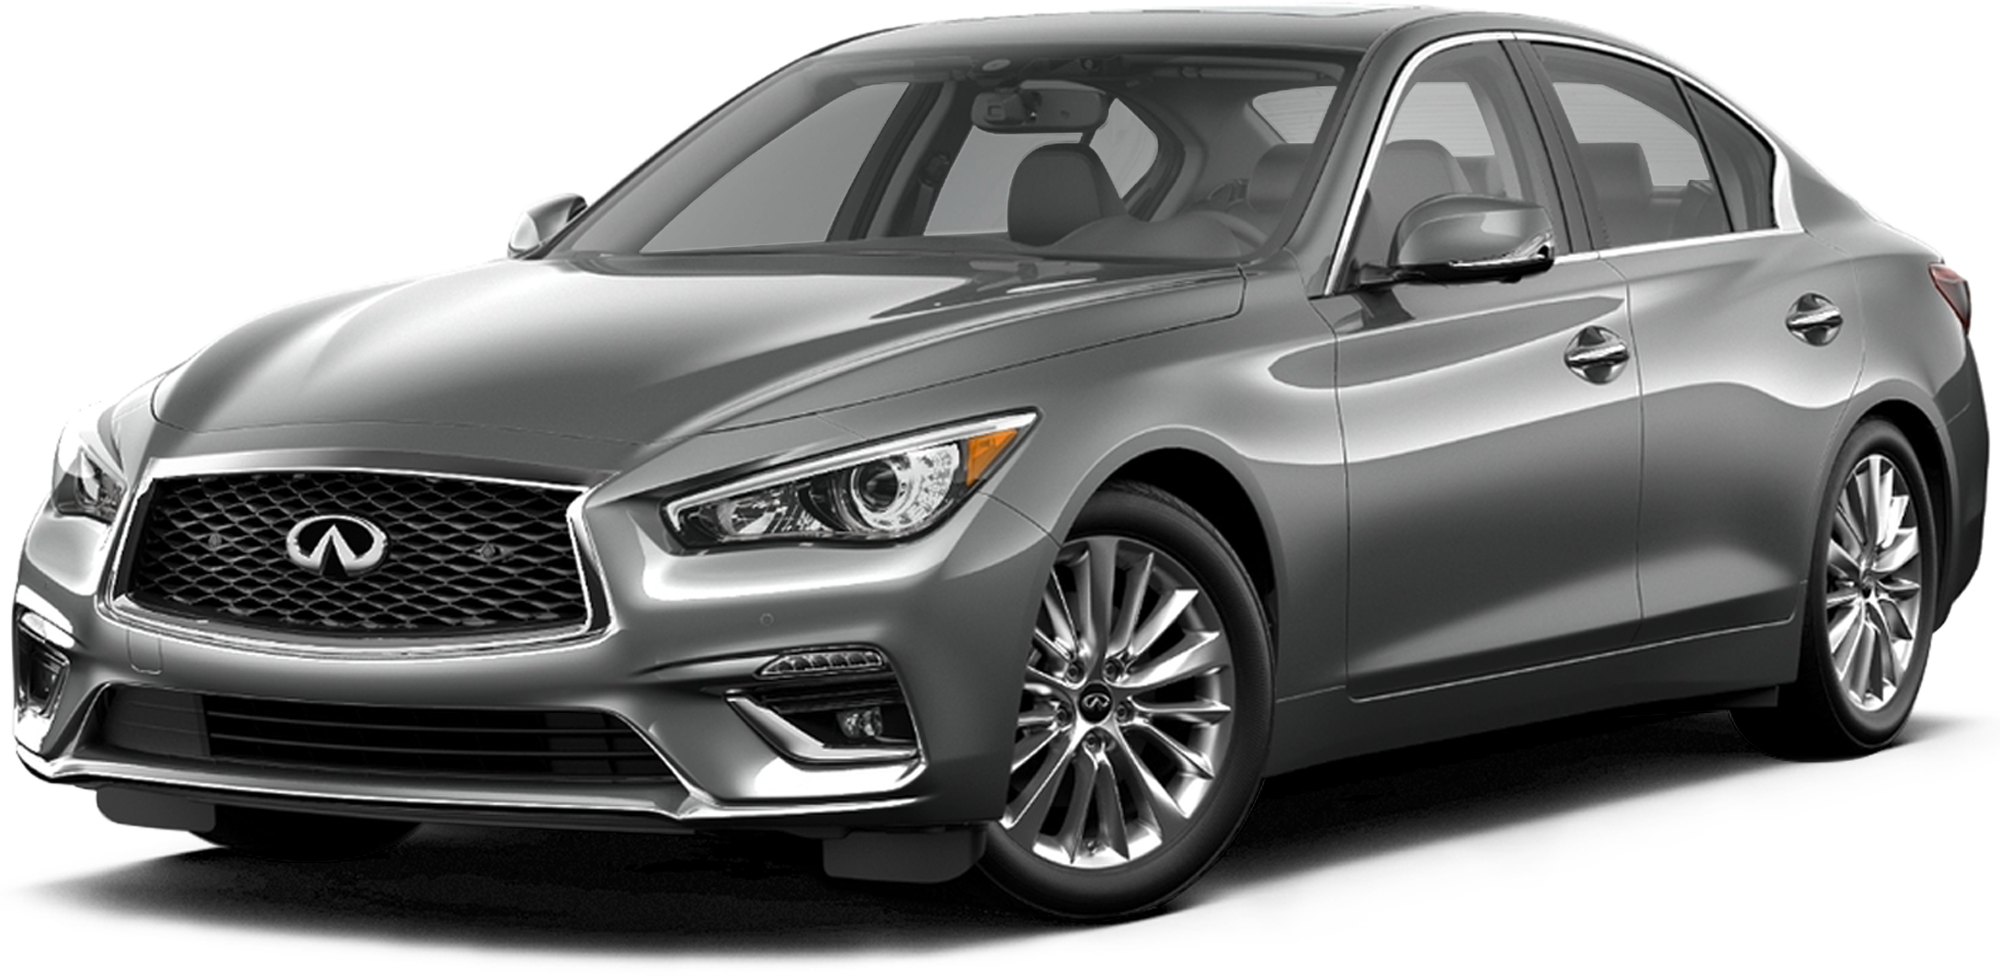 2022-infiniti-q50-incentives-specials-offers-in-troy-and-farmington